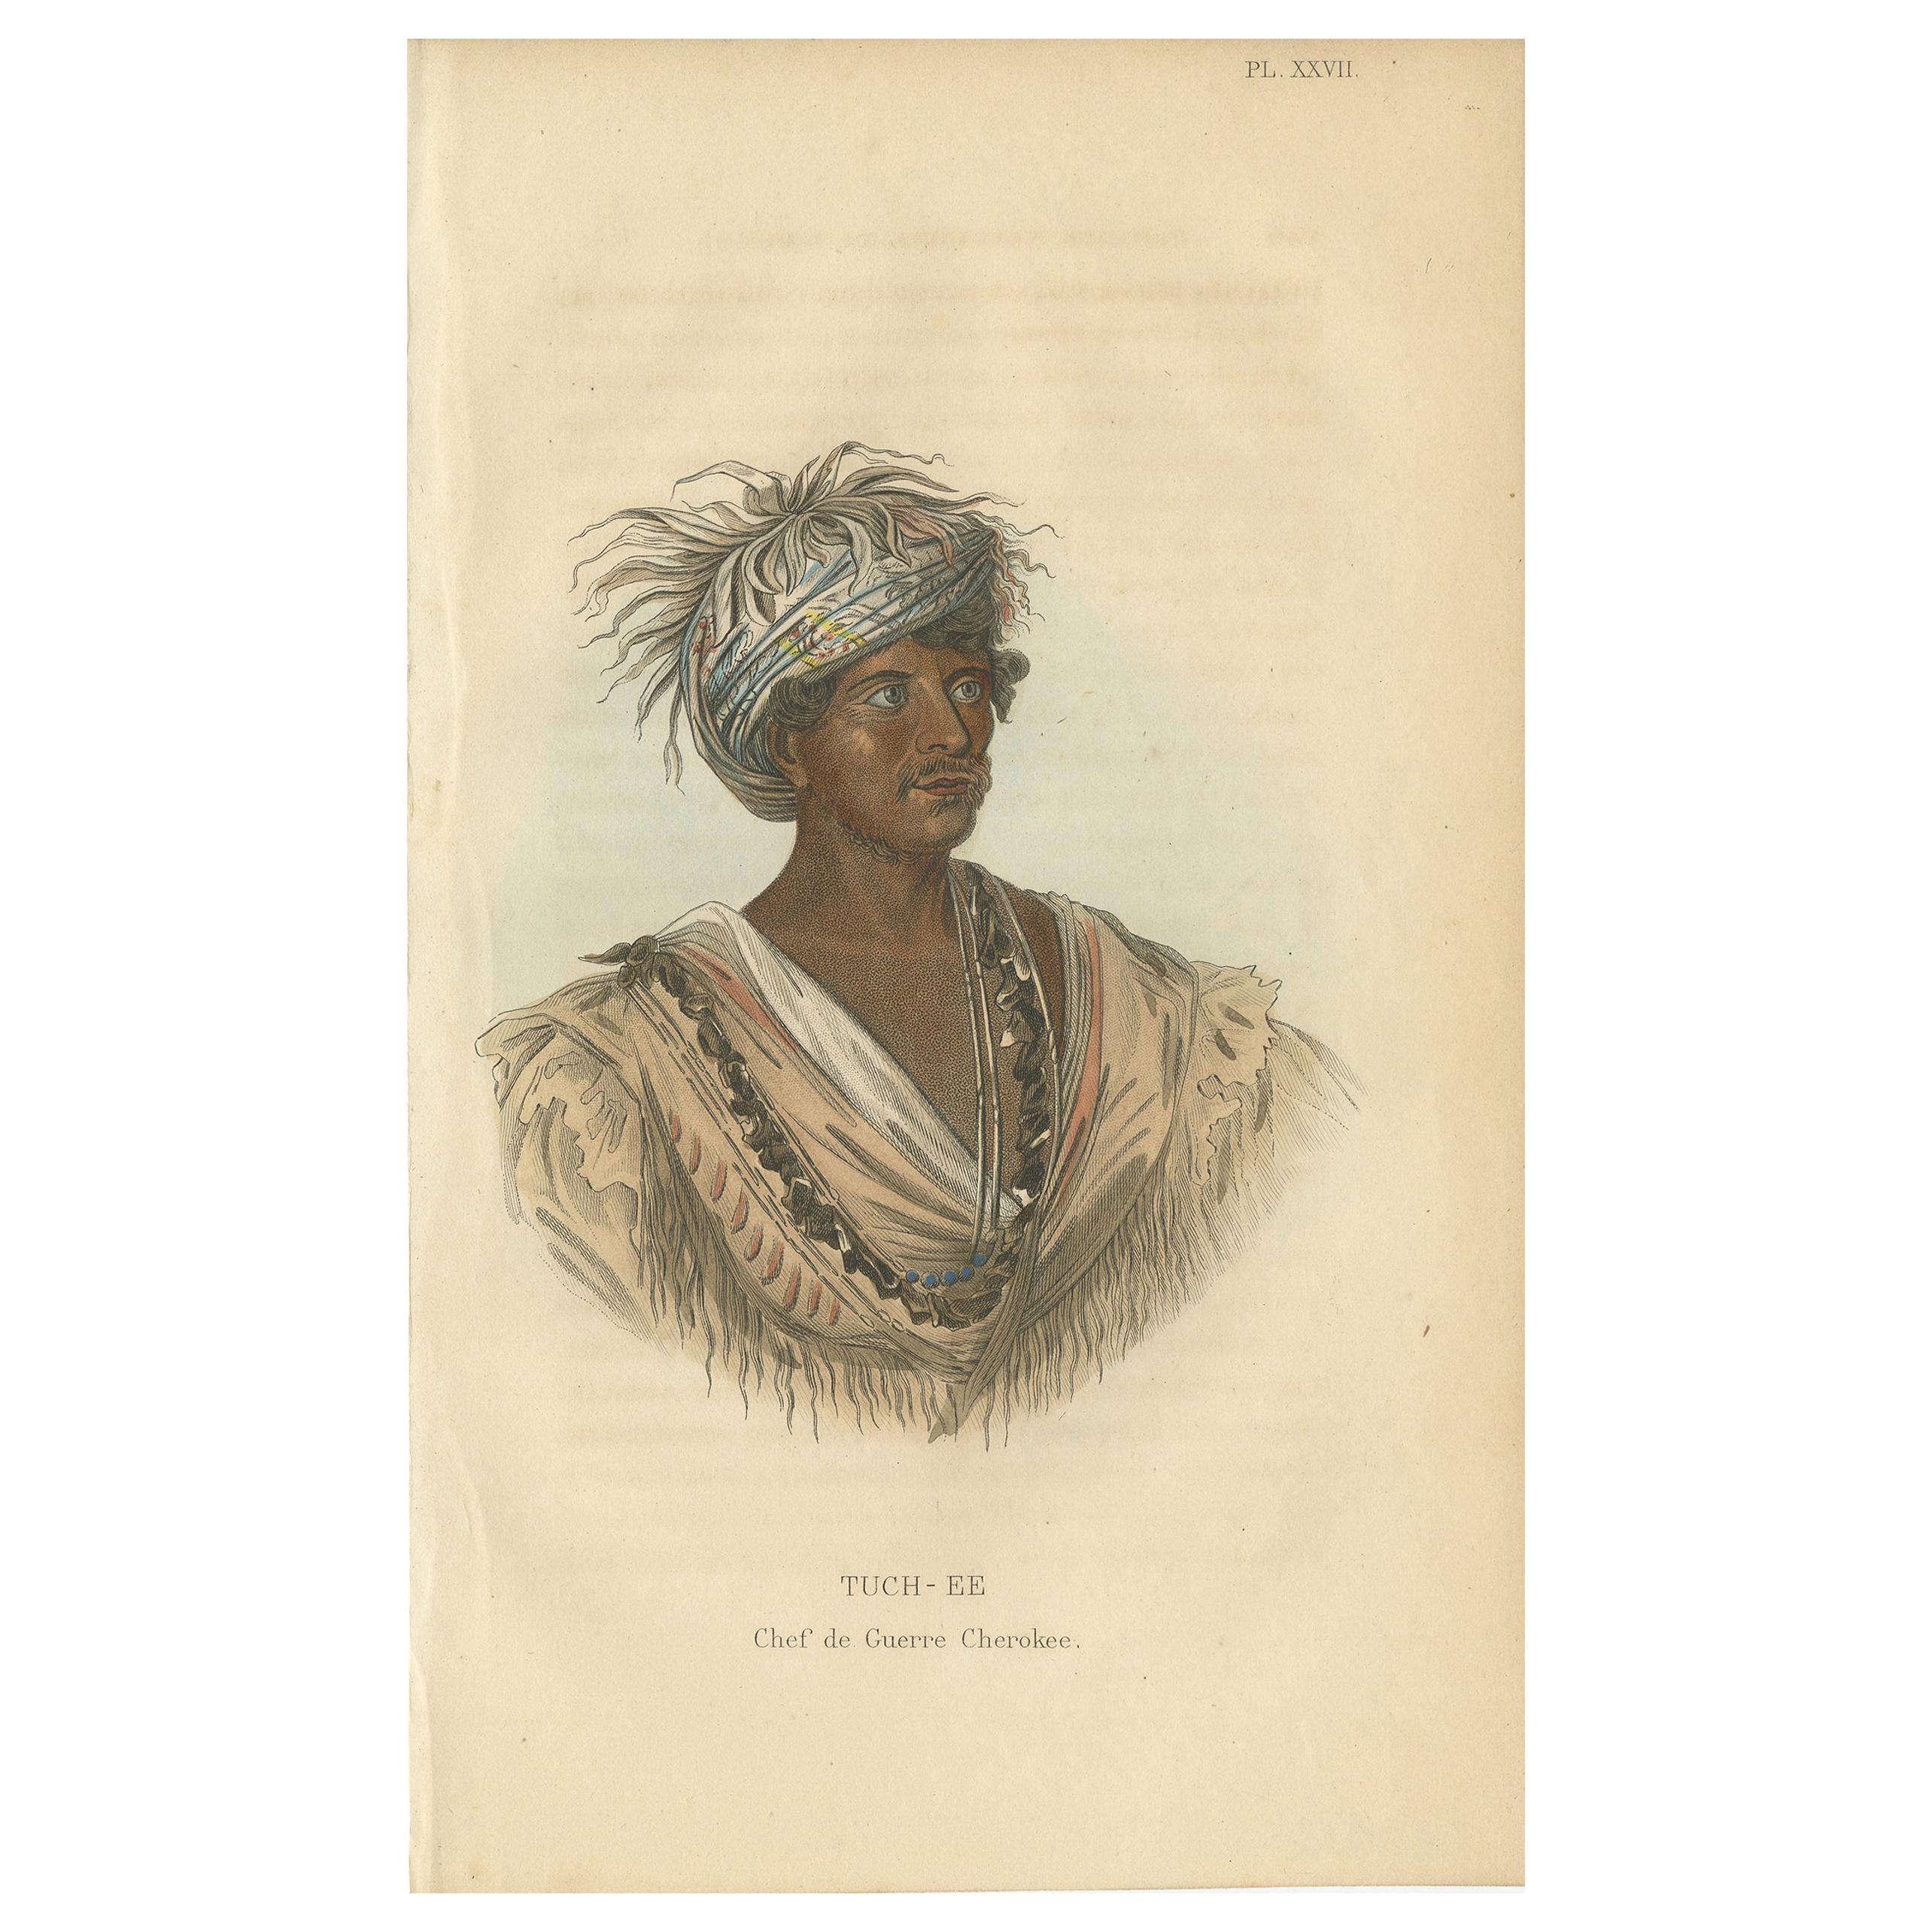 Antique Print of a Chief Warrior of the Cherokee by Prichard, 1843